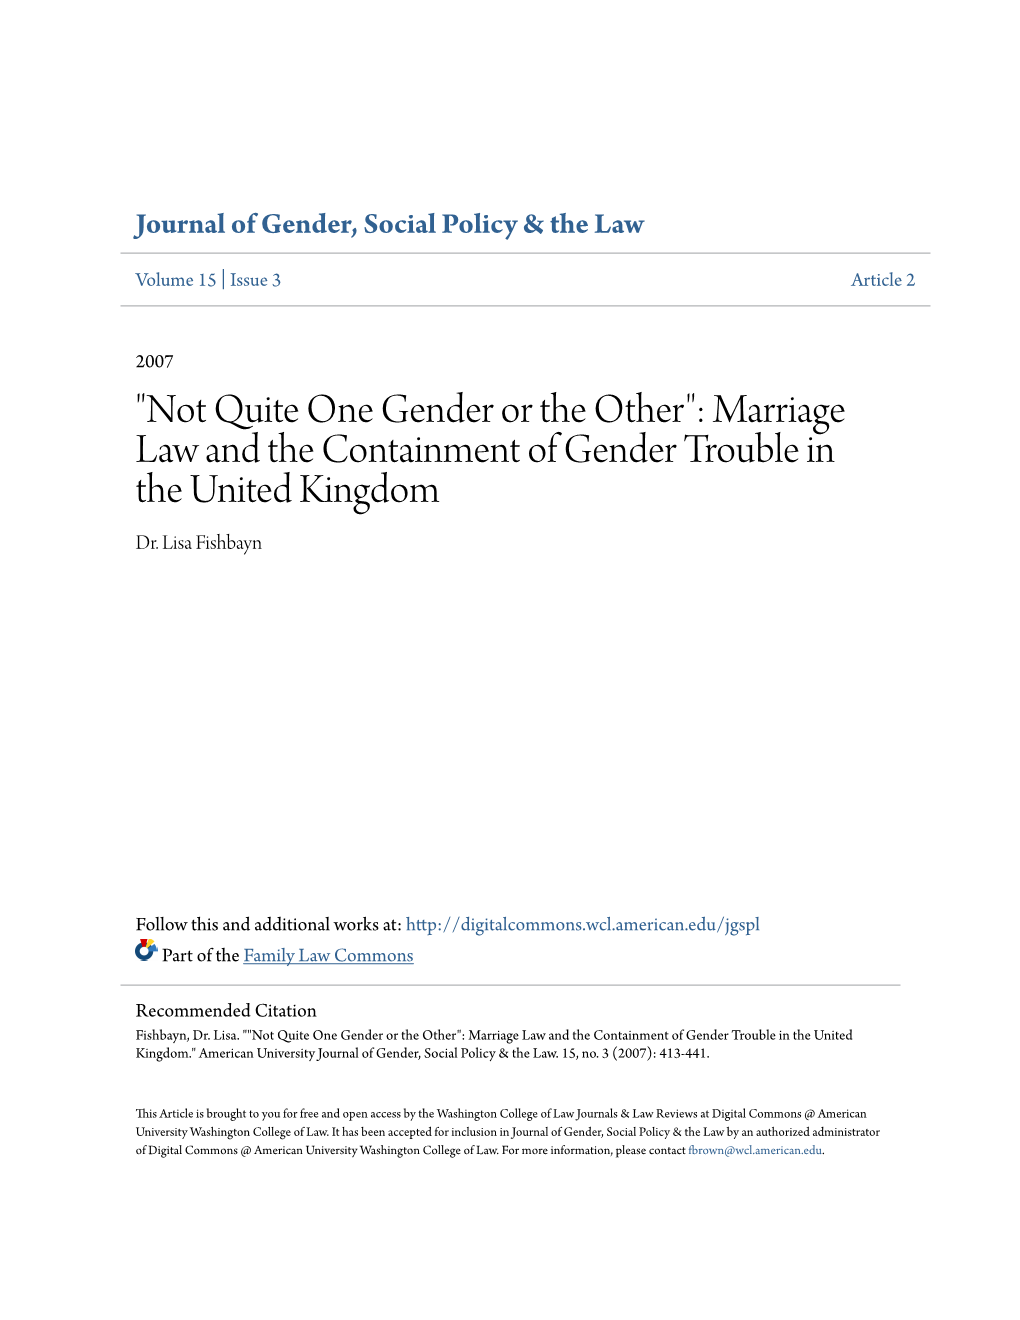 Marriage Law and the Containment of Gender Trouble in the United Kingdom Dr